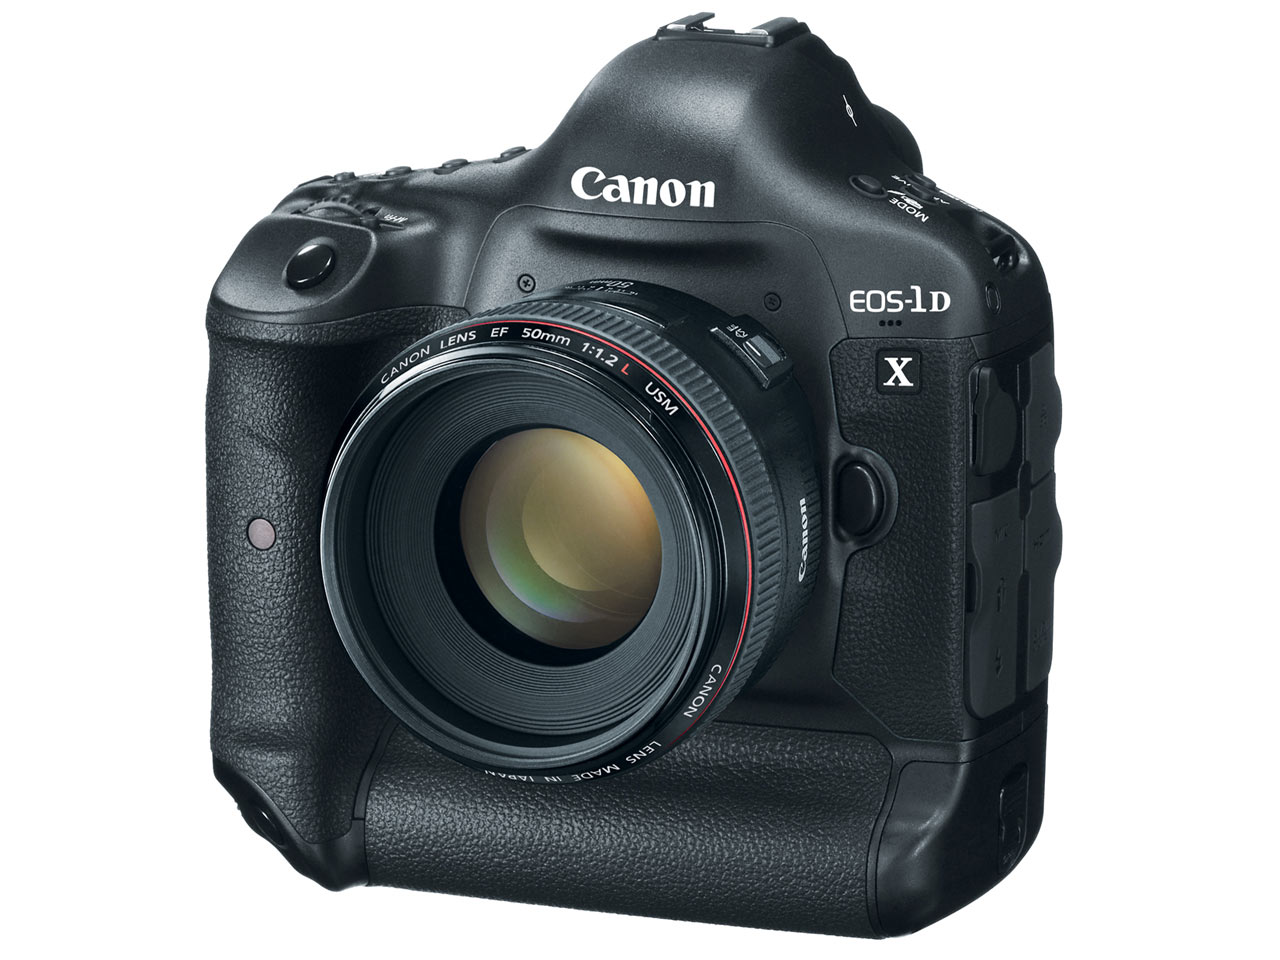 Canon 1D X to Replace 1D and 1DS